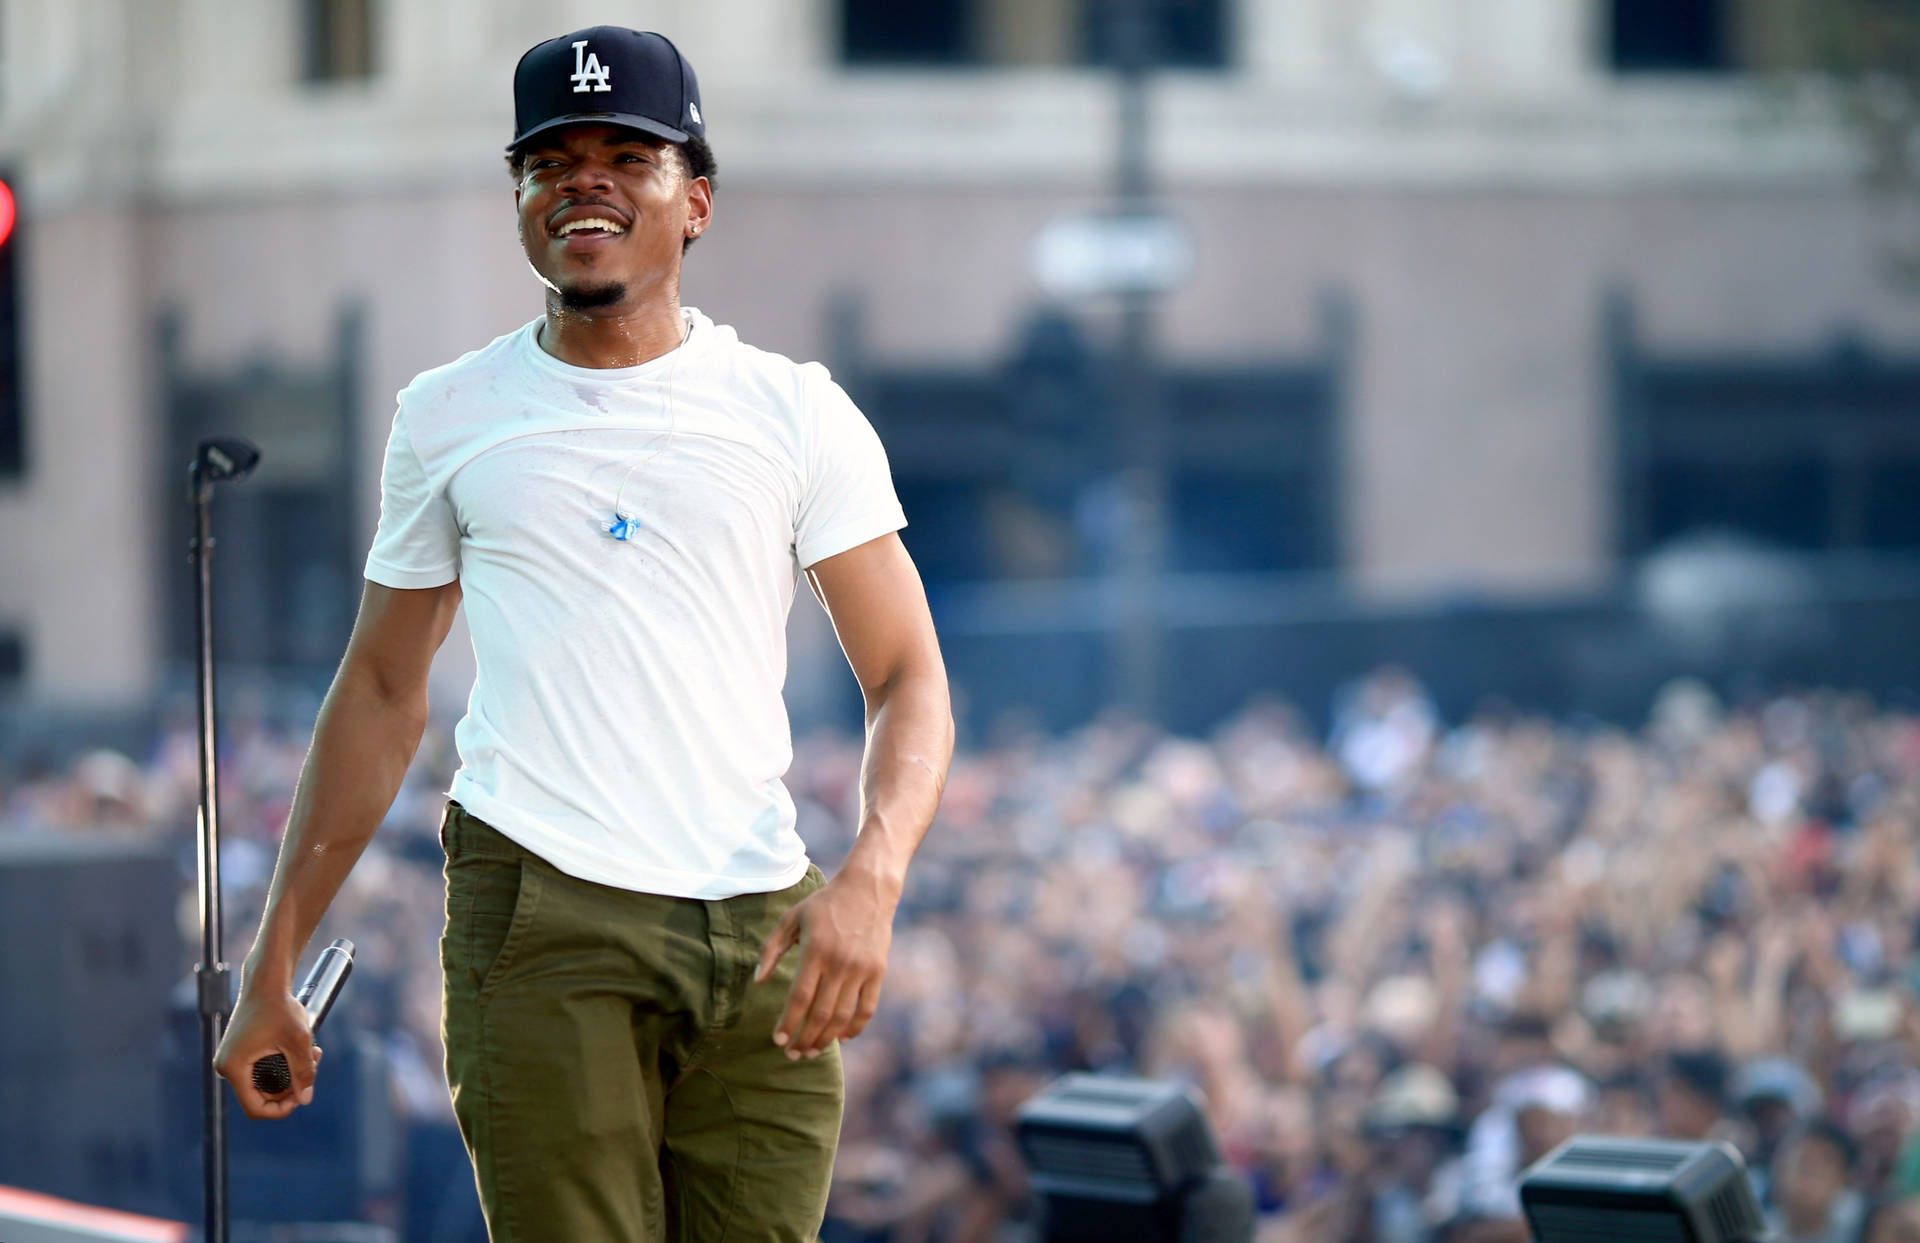 Chance the Rapper is one of the most influential artists of his generation. - Chance the Rapper